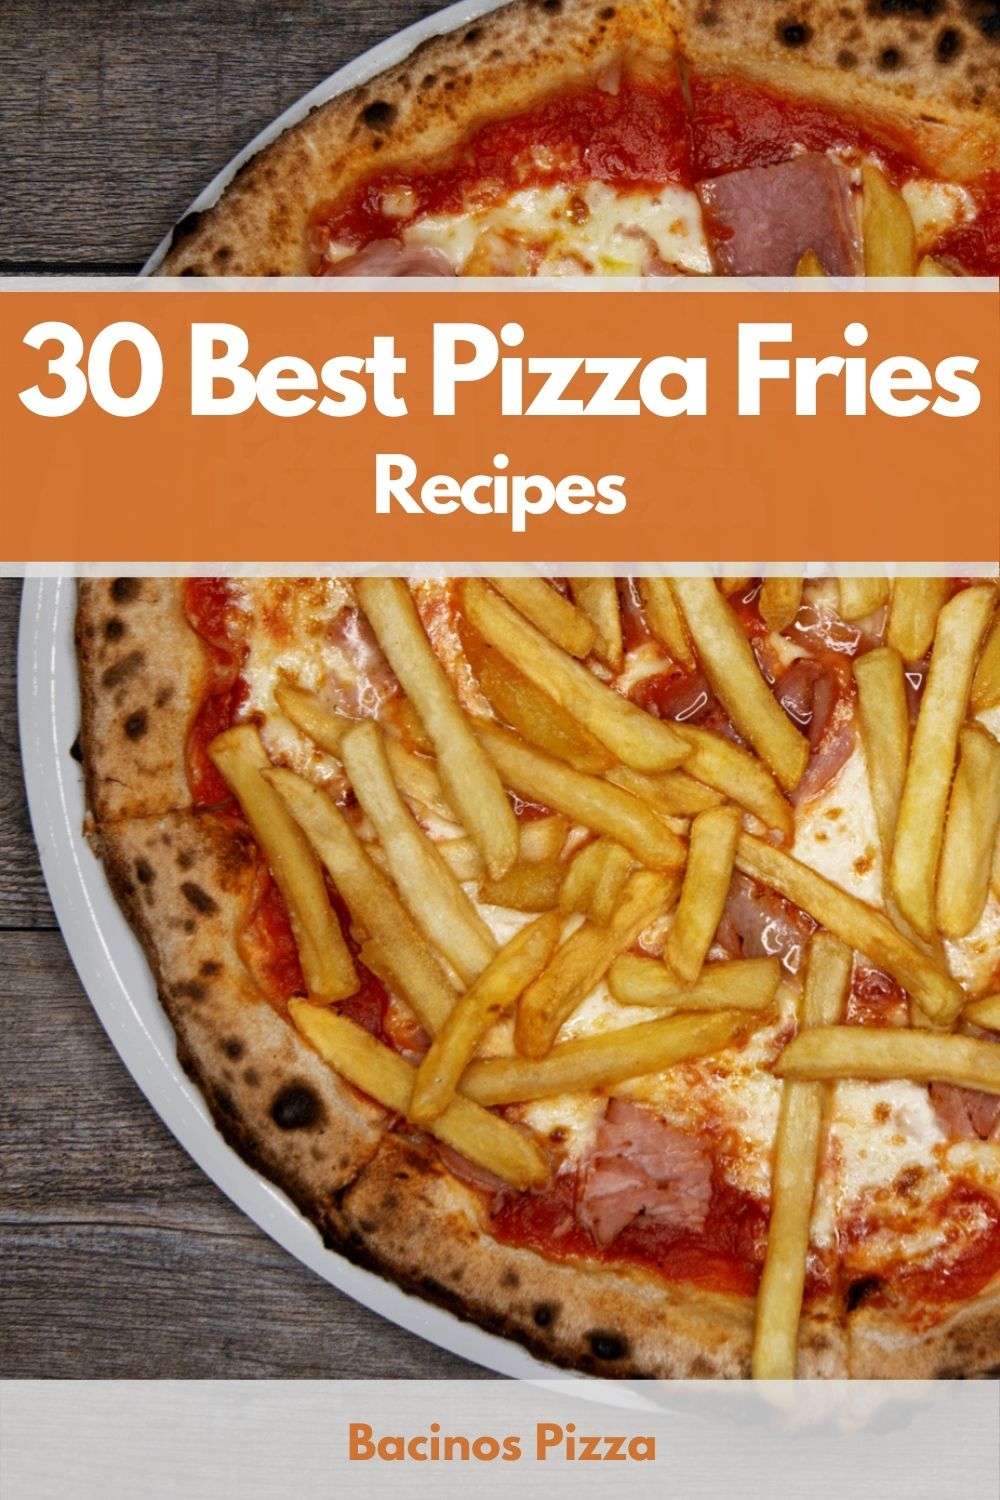 30 Best Pizza Fries Recipes pin